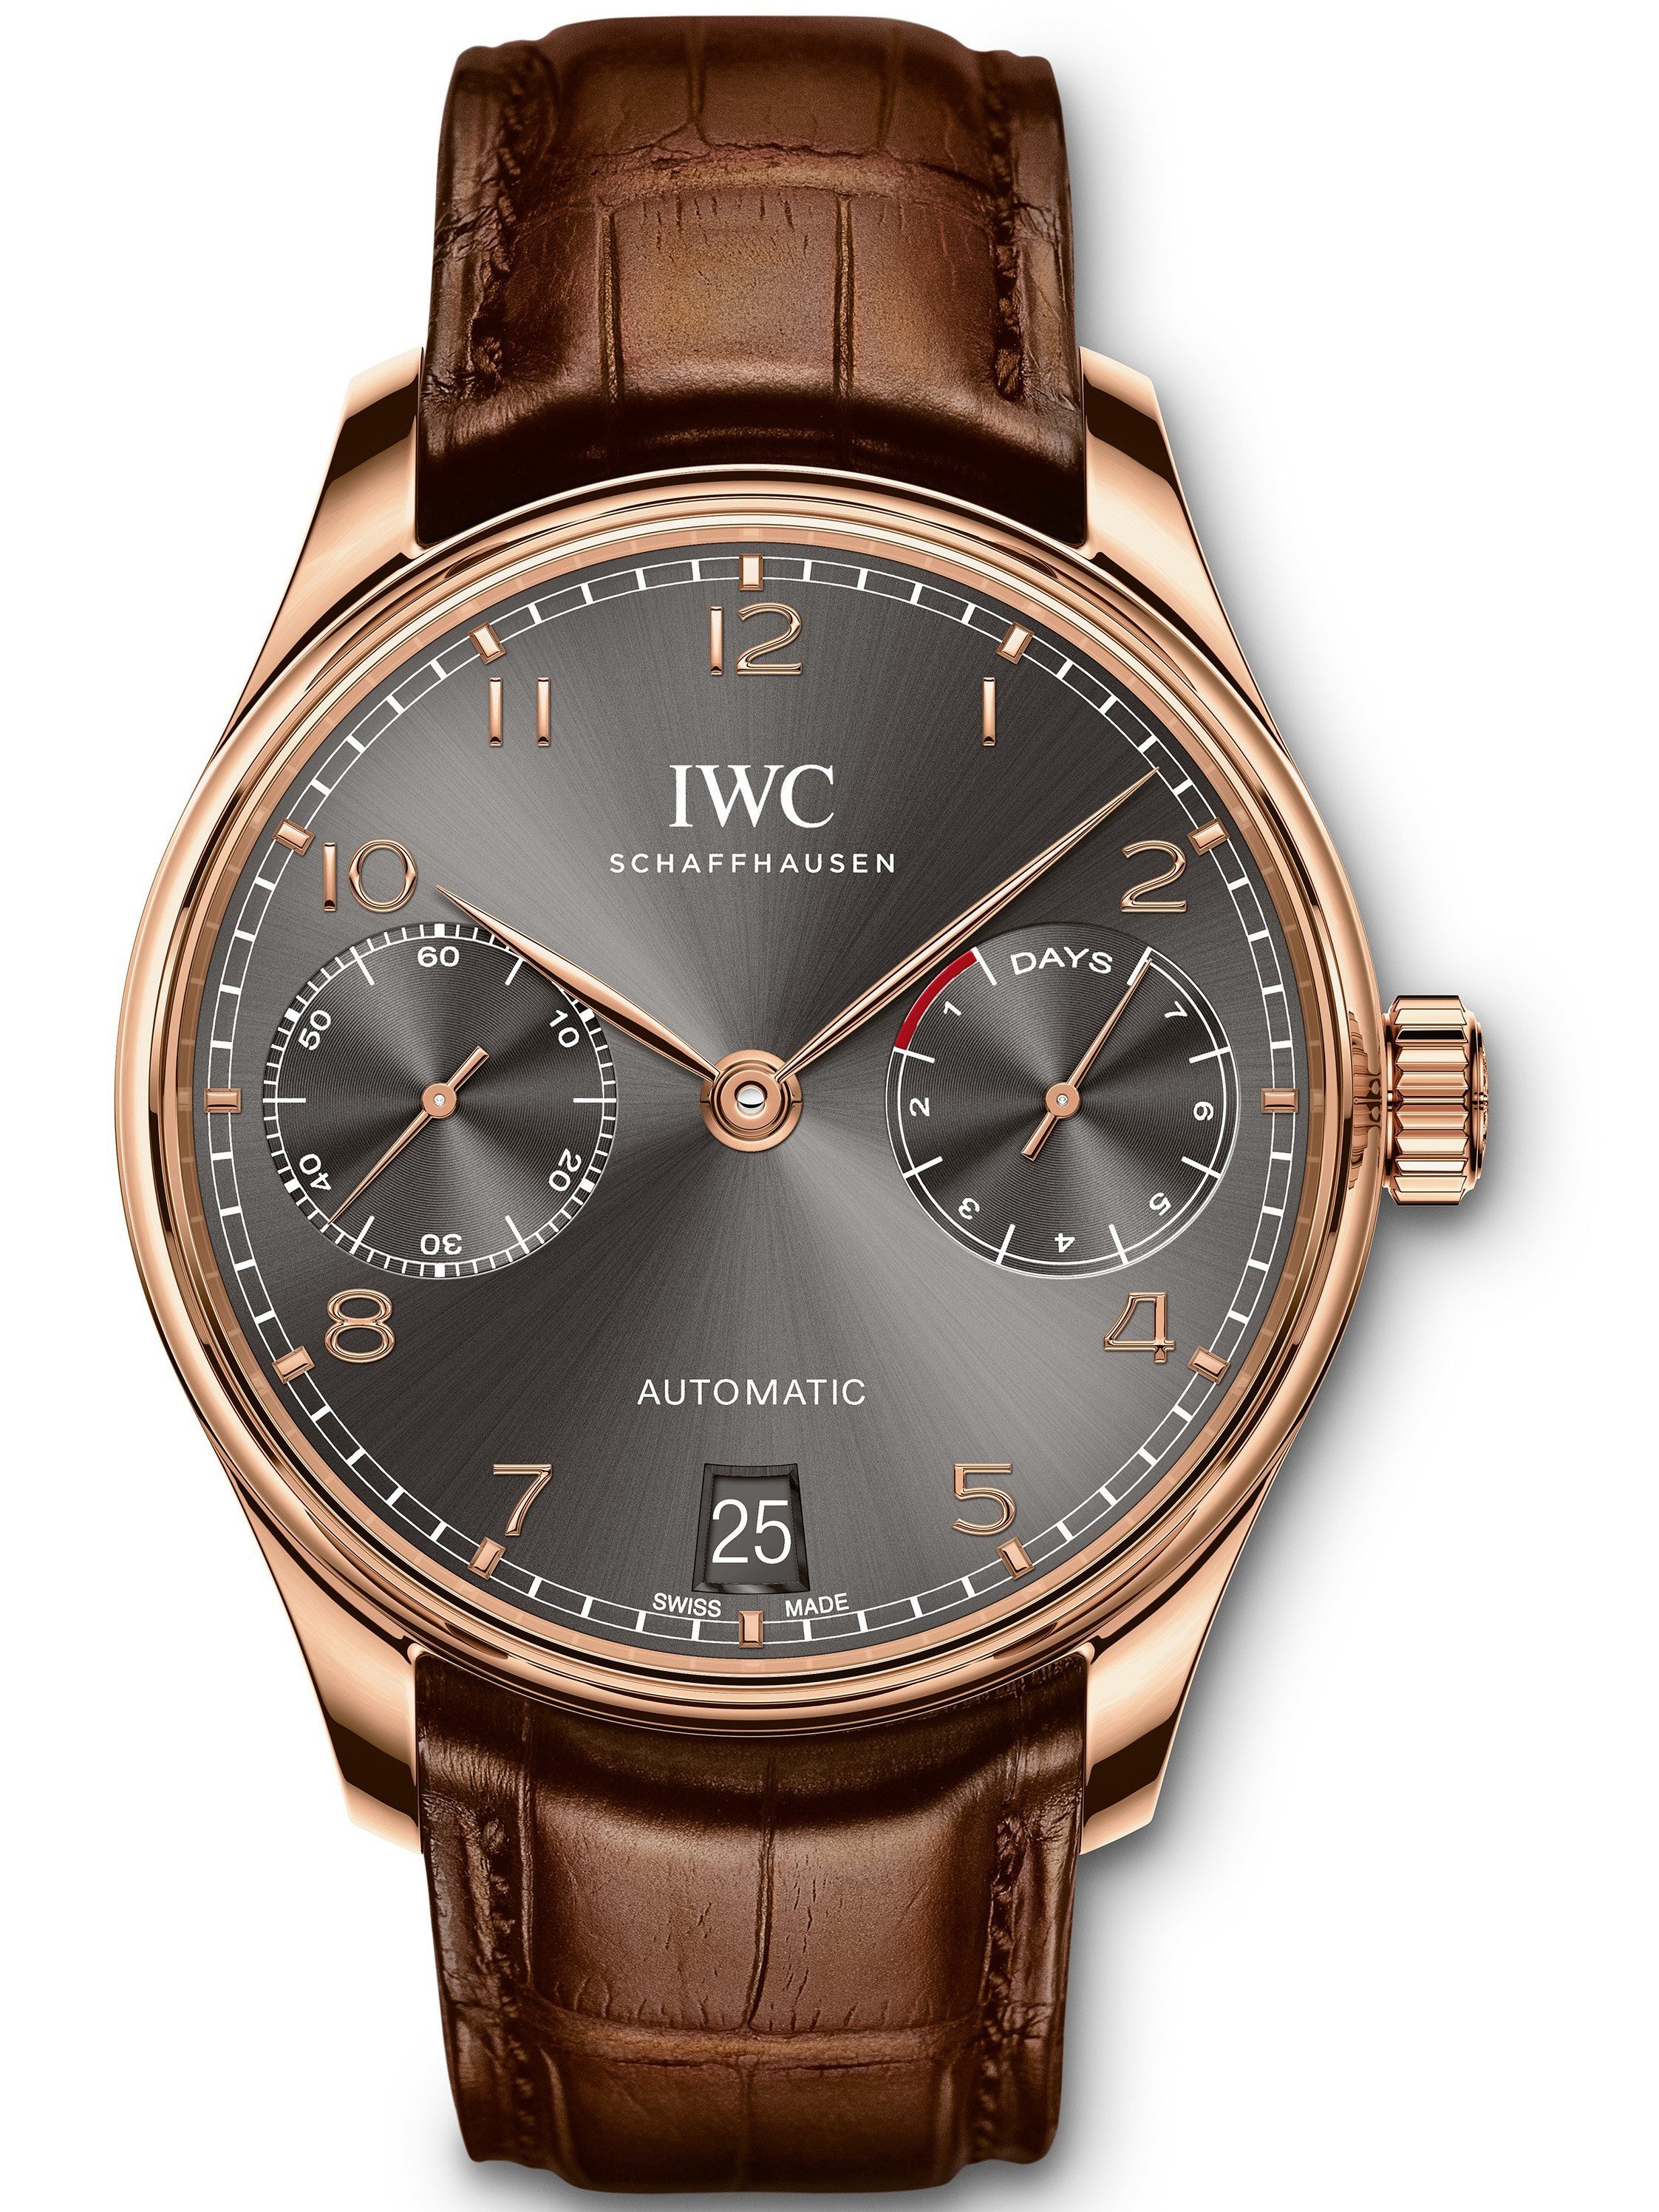 AAA Replica IWC Portugieser Automatic 7 Day Power Reserve Mens Watch IW500702